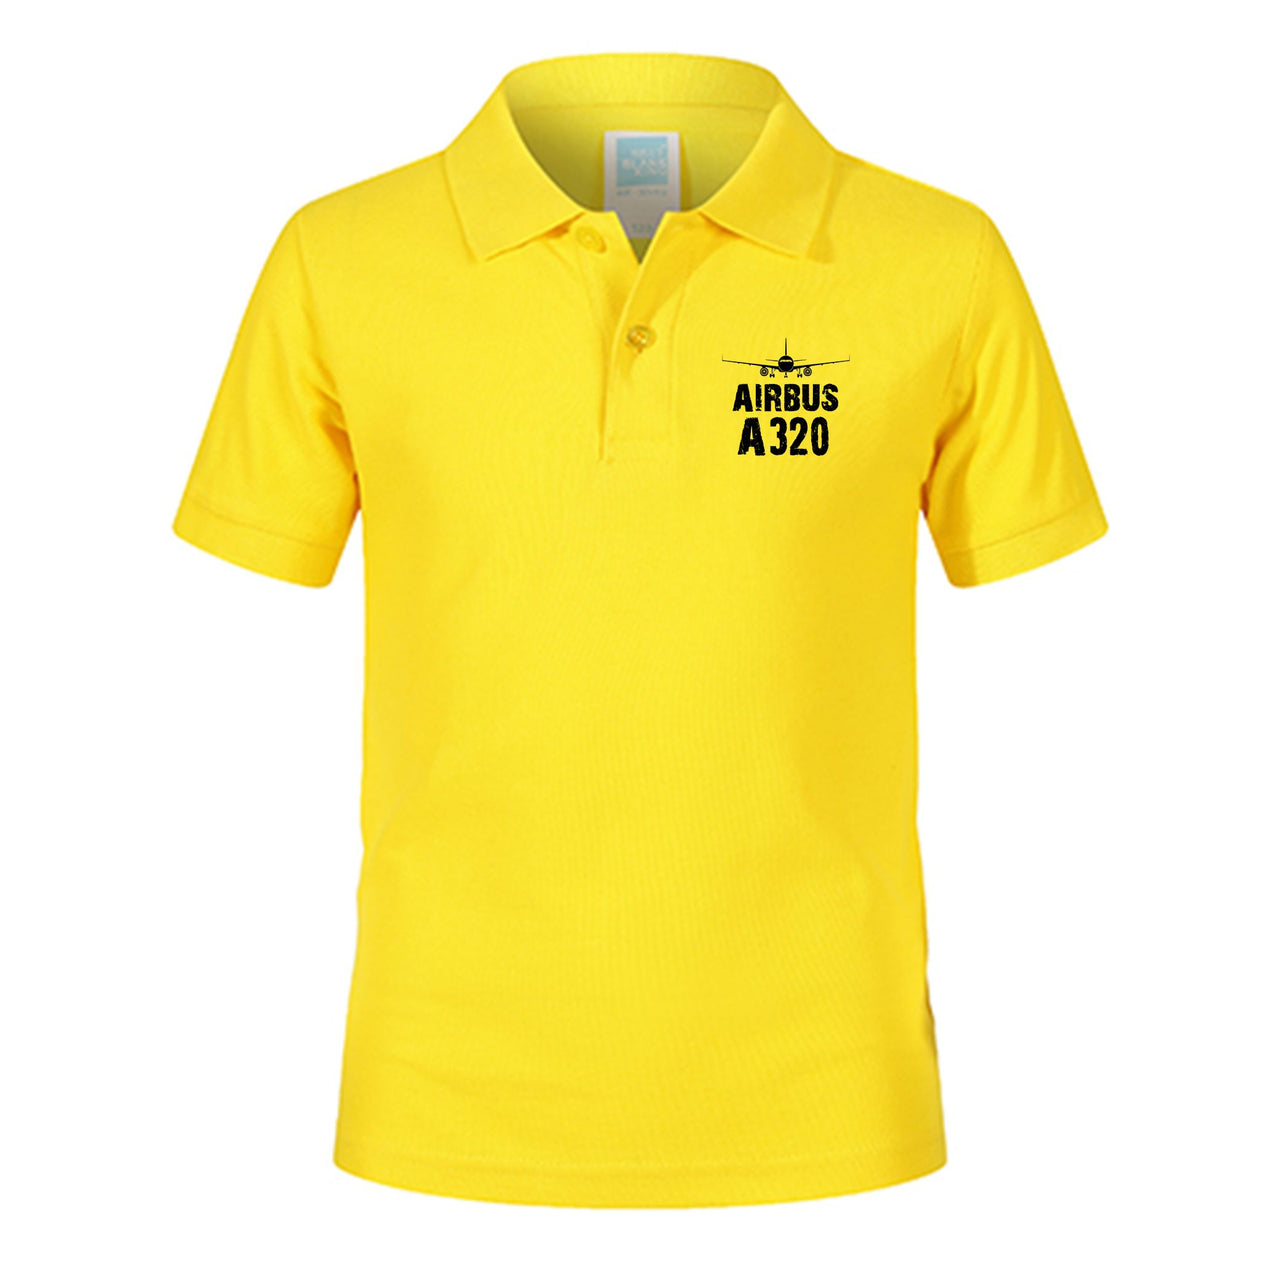 Airbus A320 & Plane Designed Children Polo T-Shirts